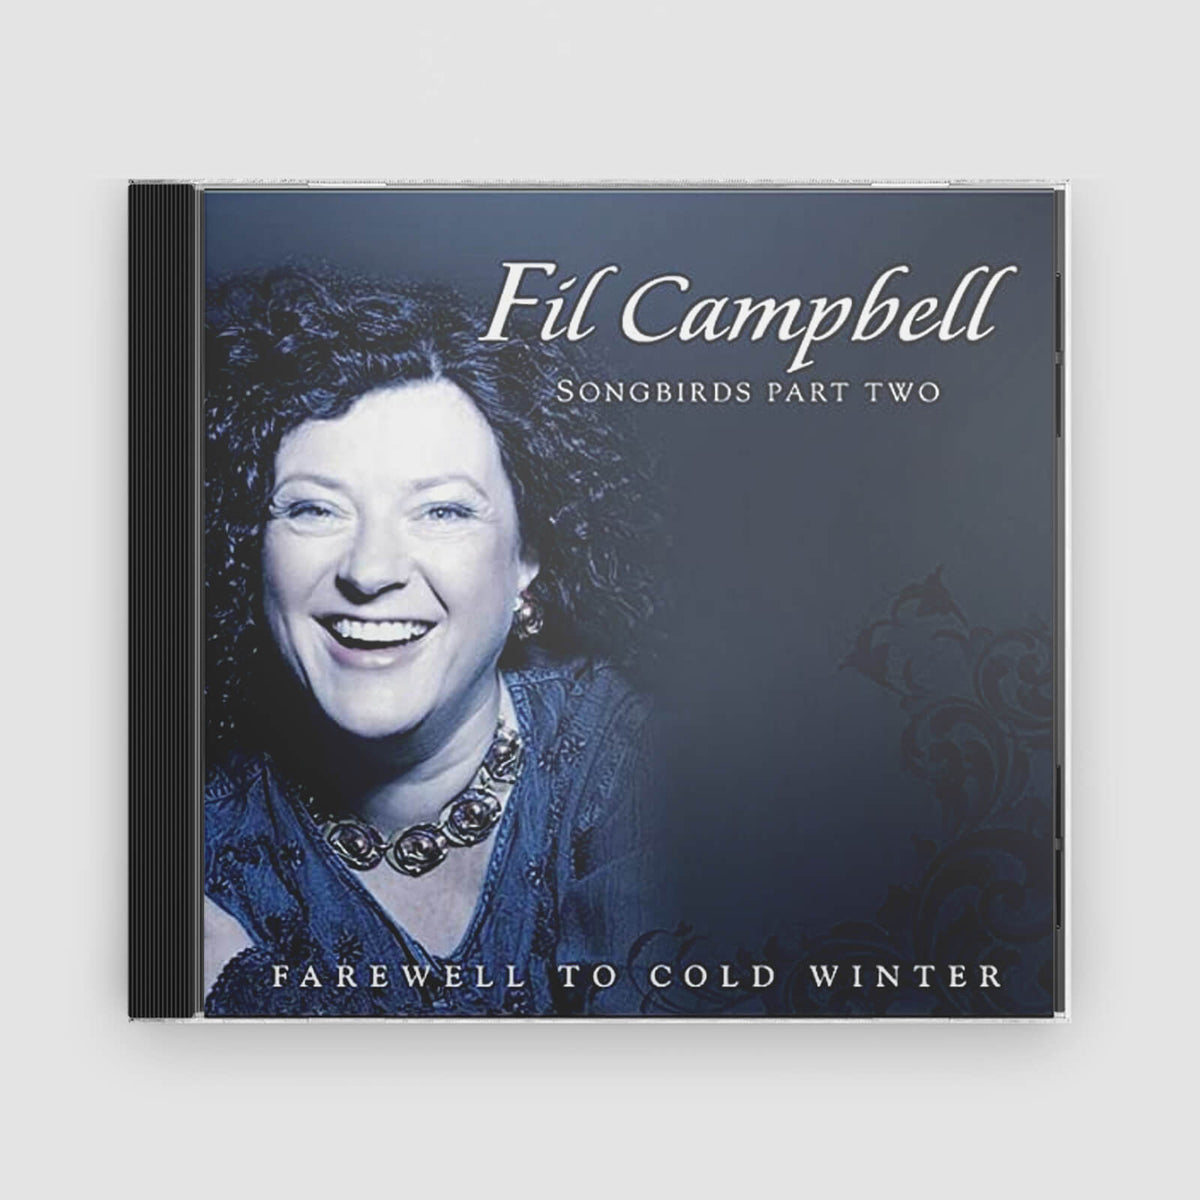 Fil Campbell : Farewell To Cold Winter - Songbirds Part Two